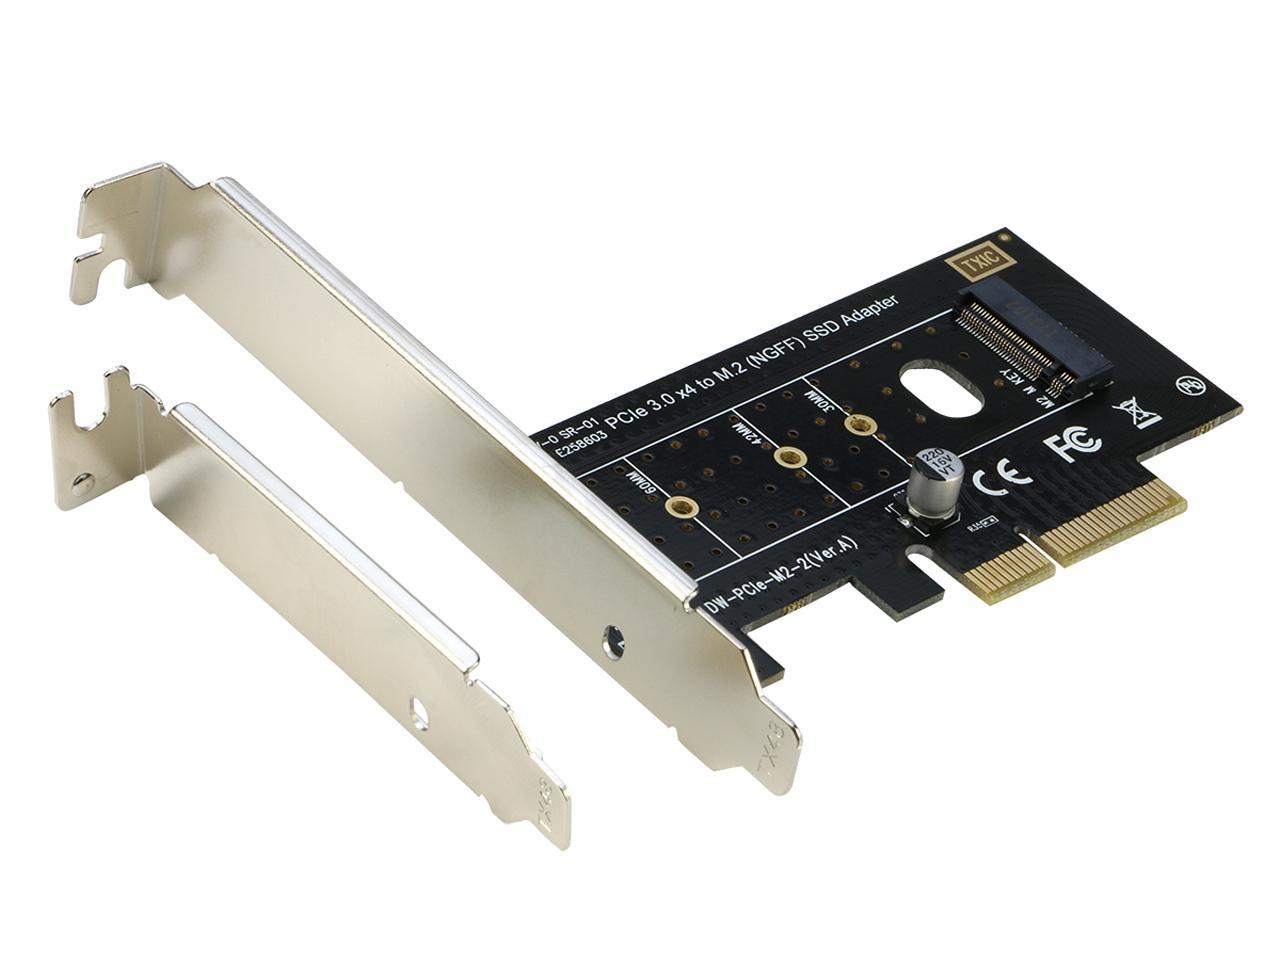 NVMe AHCI PCIe x4 M.2 NGFF SSD to PCIE 3.0 x4 converter adapter In IJ 